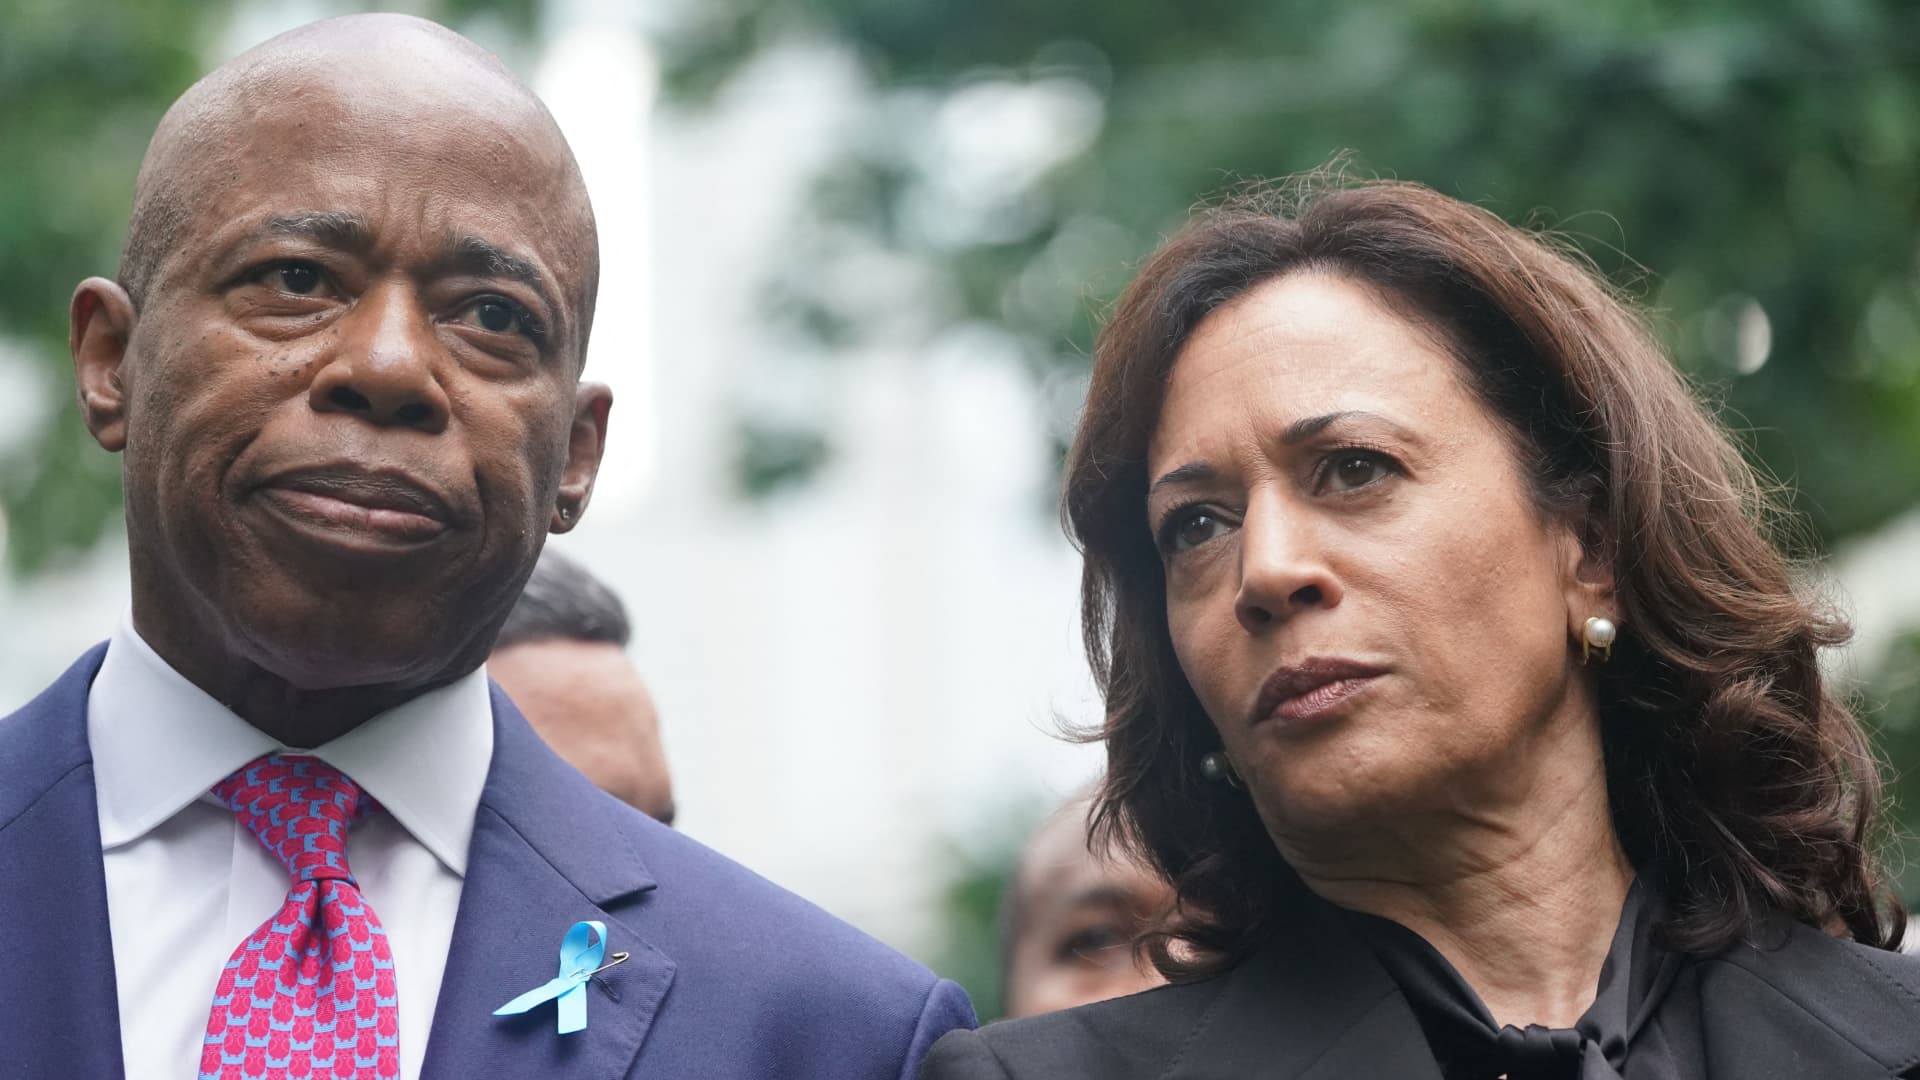 New York Mayor Eric Adams and U.S. Vice President Kamala Harris attend a remembrance ceremony on the 22nd anniversary of the 9/11 terror attacks, in New York City, Sept. 11, 2023.